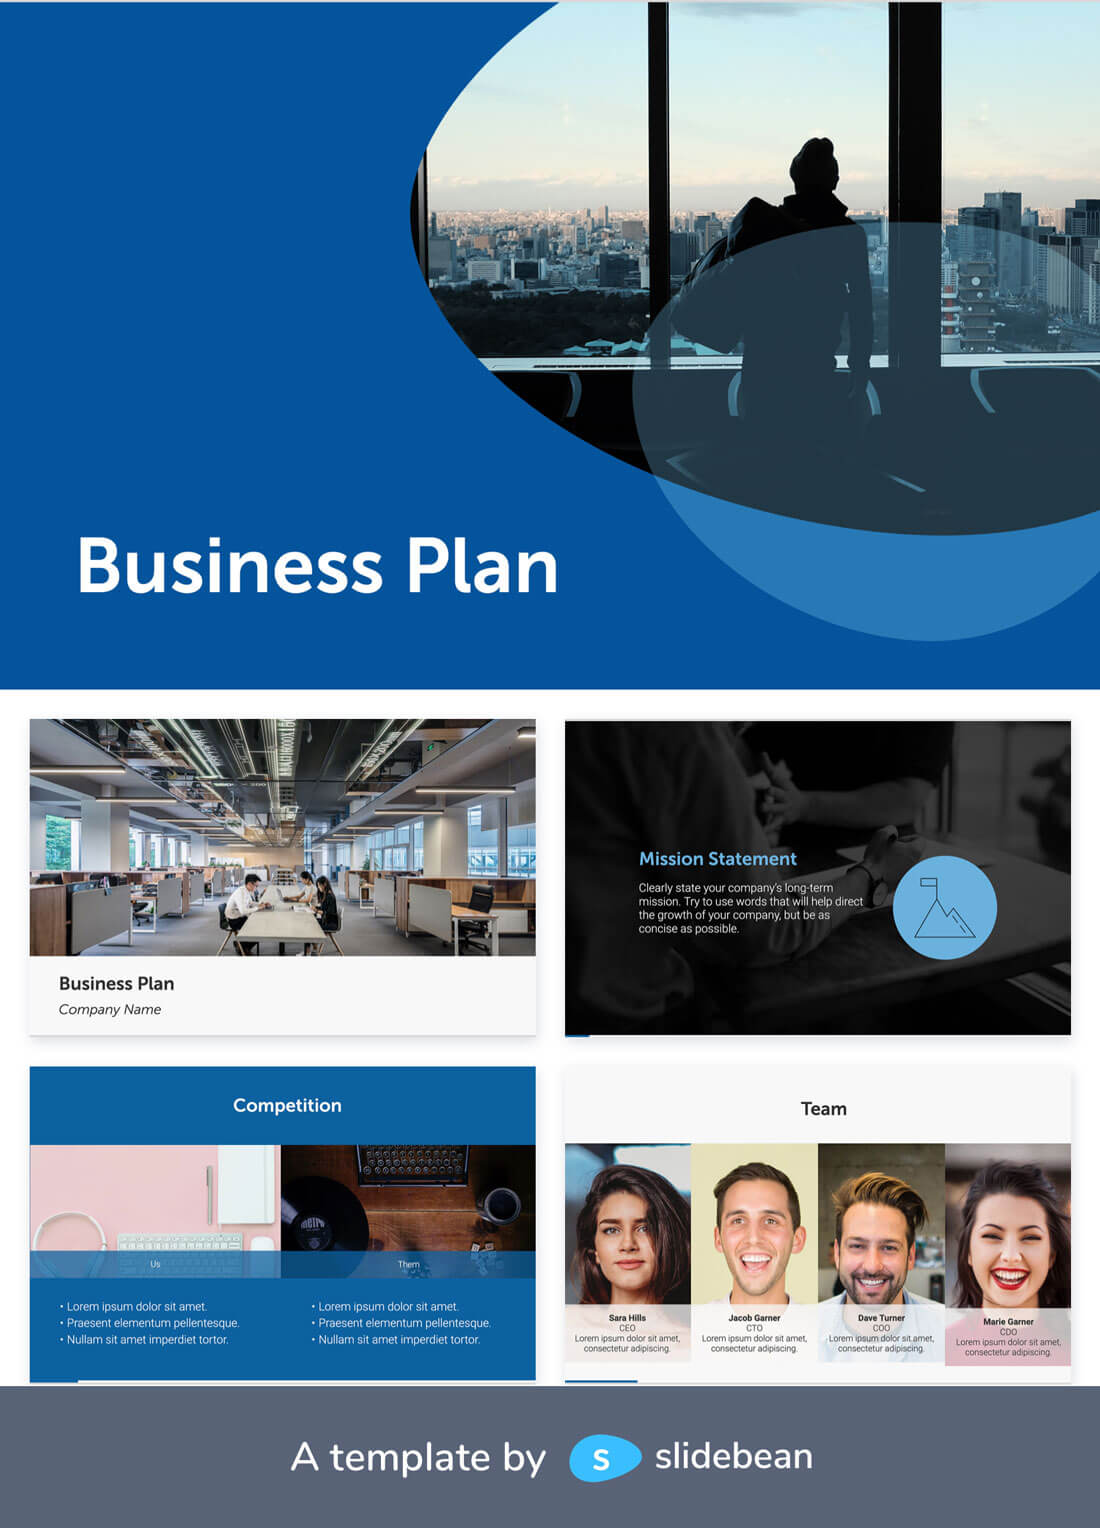 Image contains a business plan template